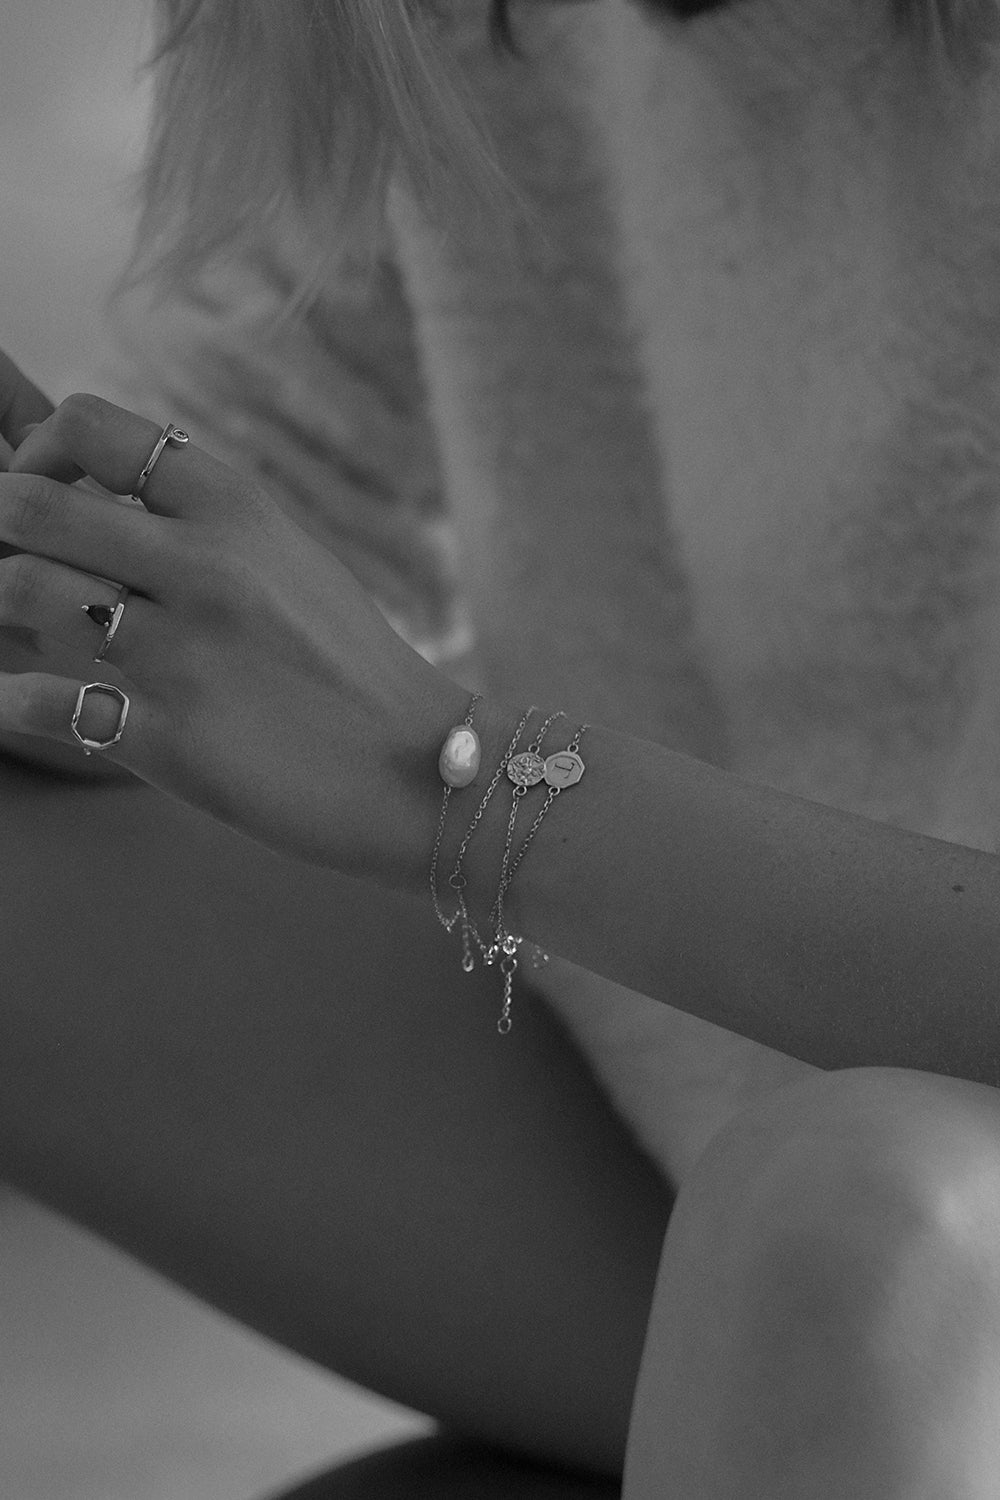 Coin Bracelet | Silver or 9K White Gold, More Options Available| Natasha Schweitzer